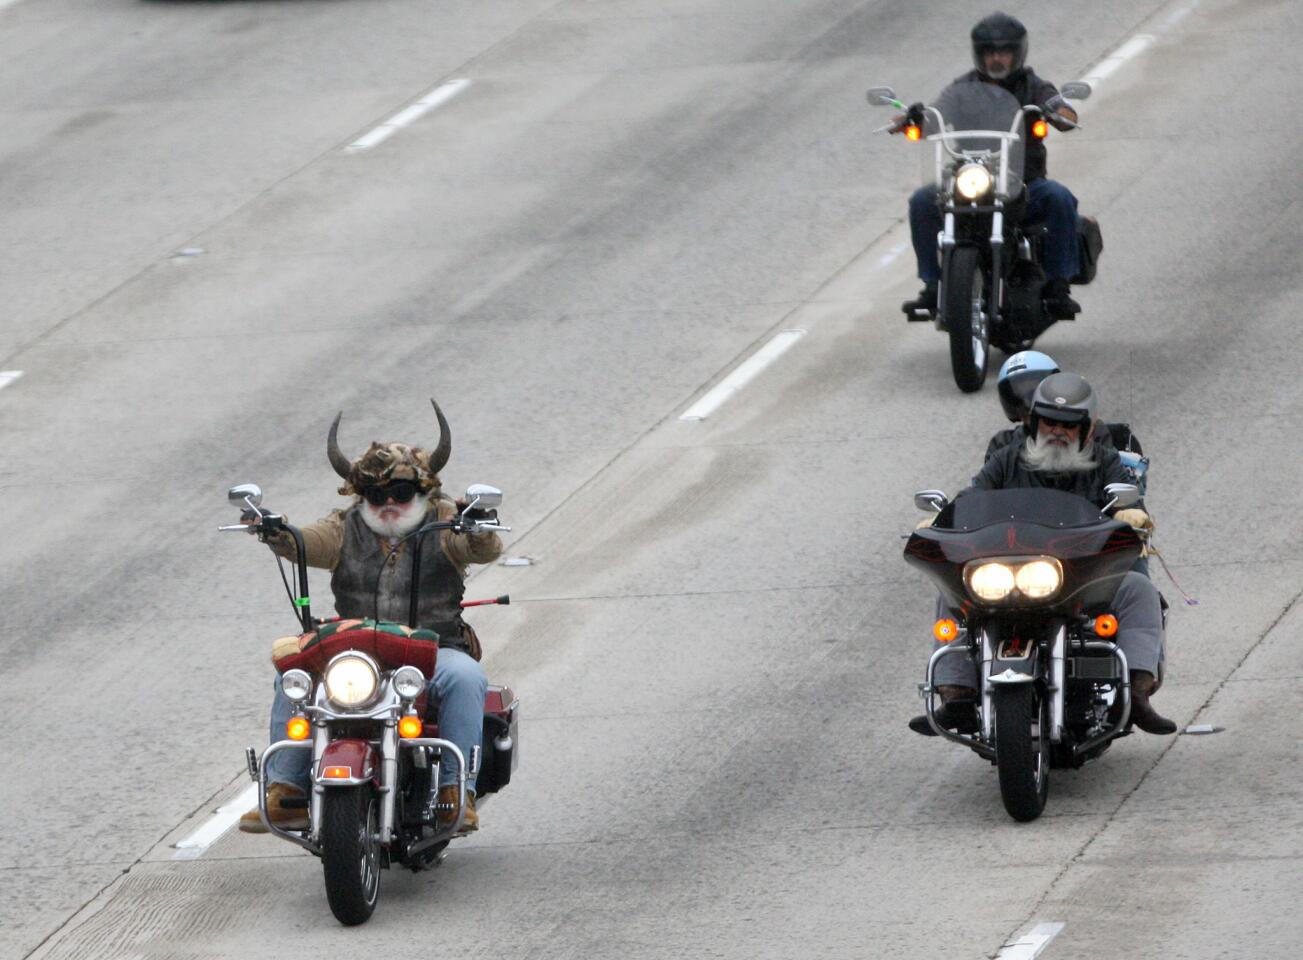 Photo Gallery: 32nd and last Love Ride at Harley-Davidson motorcycles in Glendale